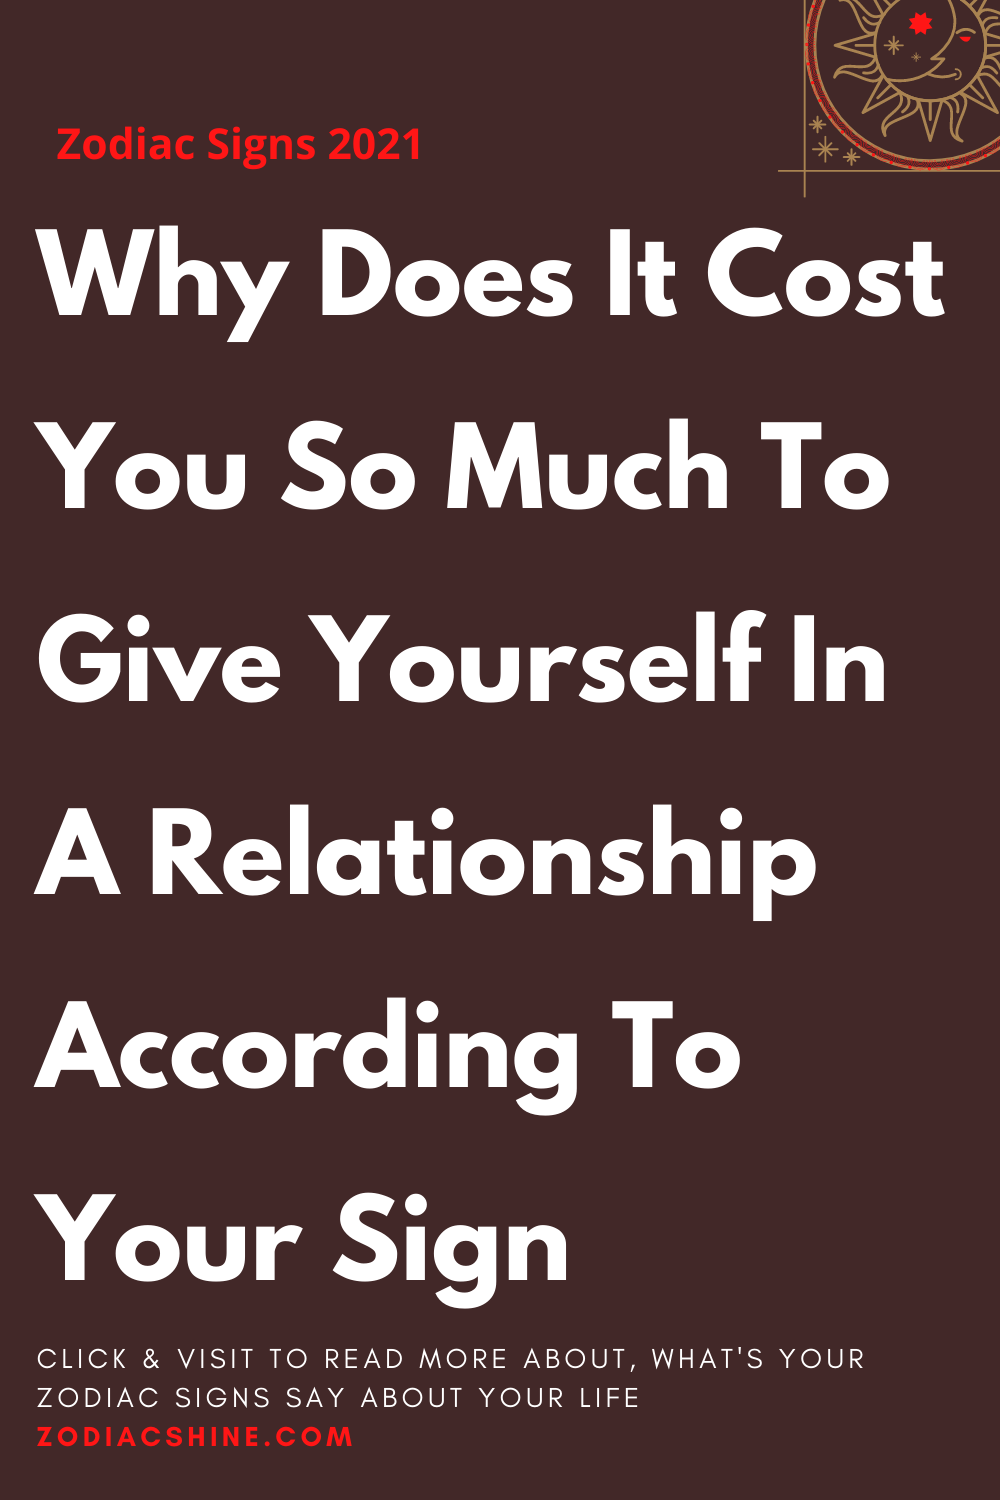 Why Does It Cost You So Much To Give Yourself In A Relationship According To Your Sign